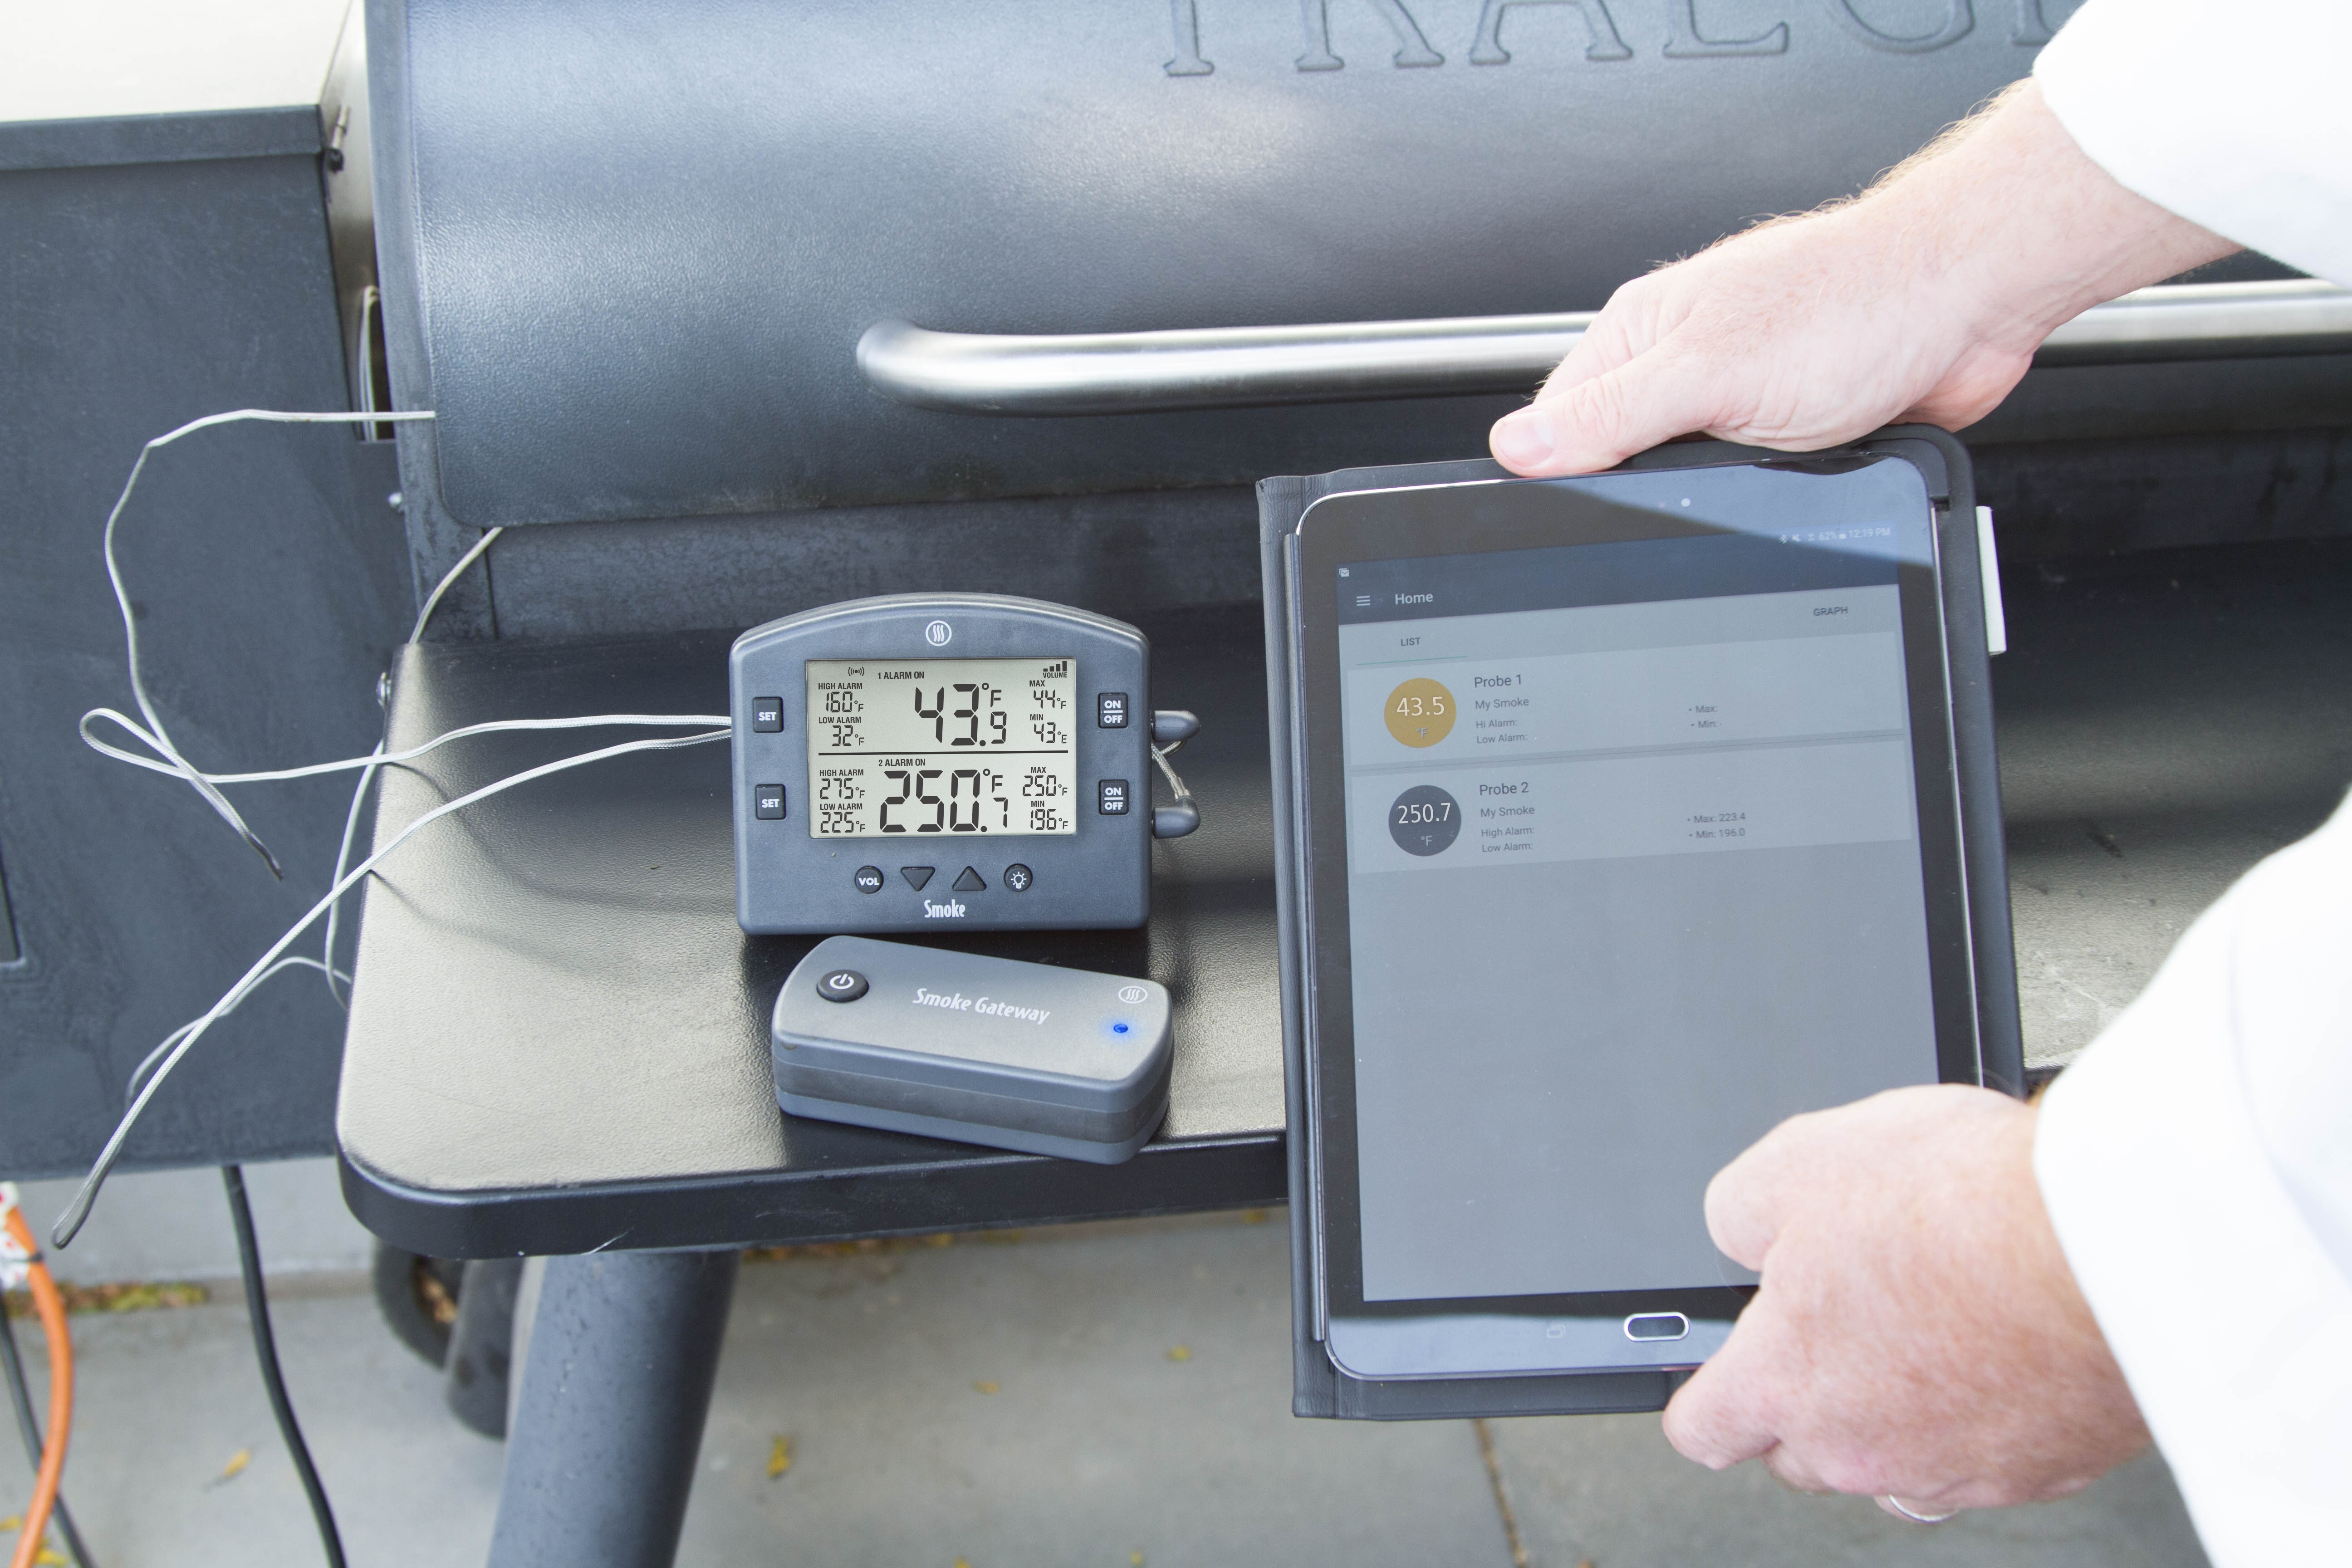 The Smoke Gateway lets you monitor your smoking turkey from anywhere with a wifi signal